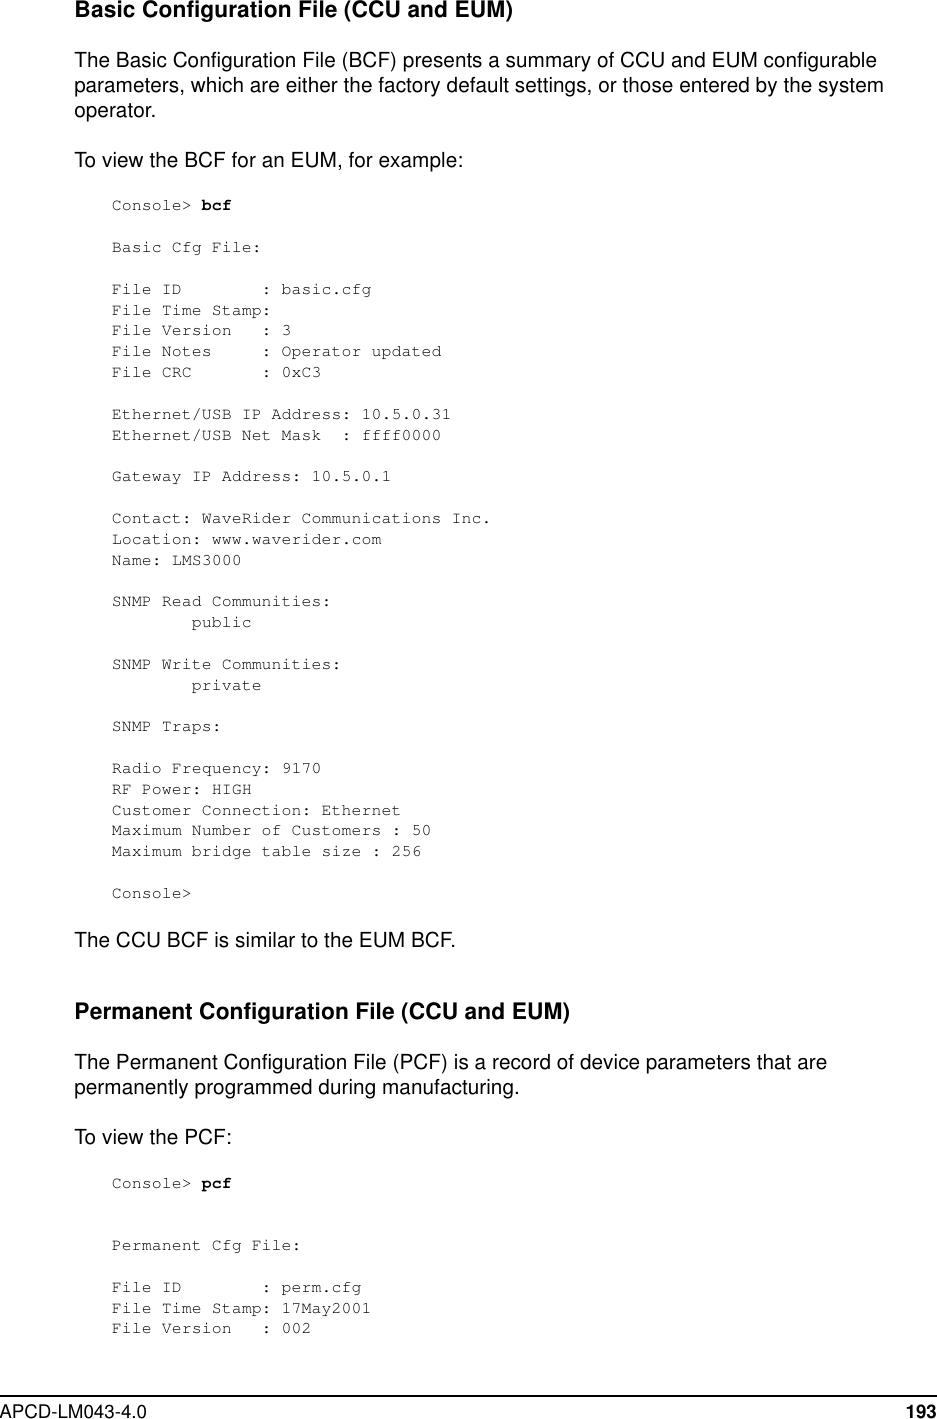 APCD-LM043-4.0 193Basic Configuration File (CCU and EUM)The Basic Configuration File (BCF) presents a summary of CCU and EUM configurableparameters, which are either the factory default settings, or those entered by the systemoperator.To view the BCF for an EUM, for example:Console&gt; bcfBasic Cfg File:File ID : basic.cfgFile Time Stamp:File Version : 3File Notes : Operator updatedFile CRC : 0xC3Ethernet/USB IP Address: 10.5.0.31Ethernet/USB Net Mask : ffff0000Gateway IP Address: 10.5.0.1Contact: WaveRider Communications Inc.Location: www.waverider.comName: LMS3000SNMP Read Communities:publicSNMP Write Communities:privateSNMP Traps:Radio Frequency: 9170RF Power: HIGHCustomer Connection: EthernetMaximum Number of Customers : 50Maximum bridge table size : 256Console&gt;The CCU BCF is similar to the EUM BCF.Permanent Configuration File (CCU and EUM)The Permanent Configuration File (PCF) is a record of device parameters that arepermanently programmed during manufacturing.To view the PCF:Console&gt; pcfPermanent Cfg File:File ID : perm.cfgFile Time Stamp: 17May2001File Version : 002